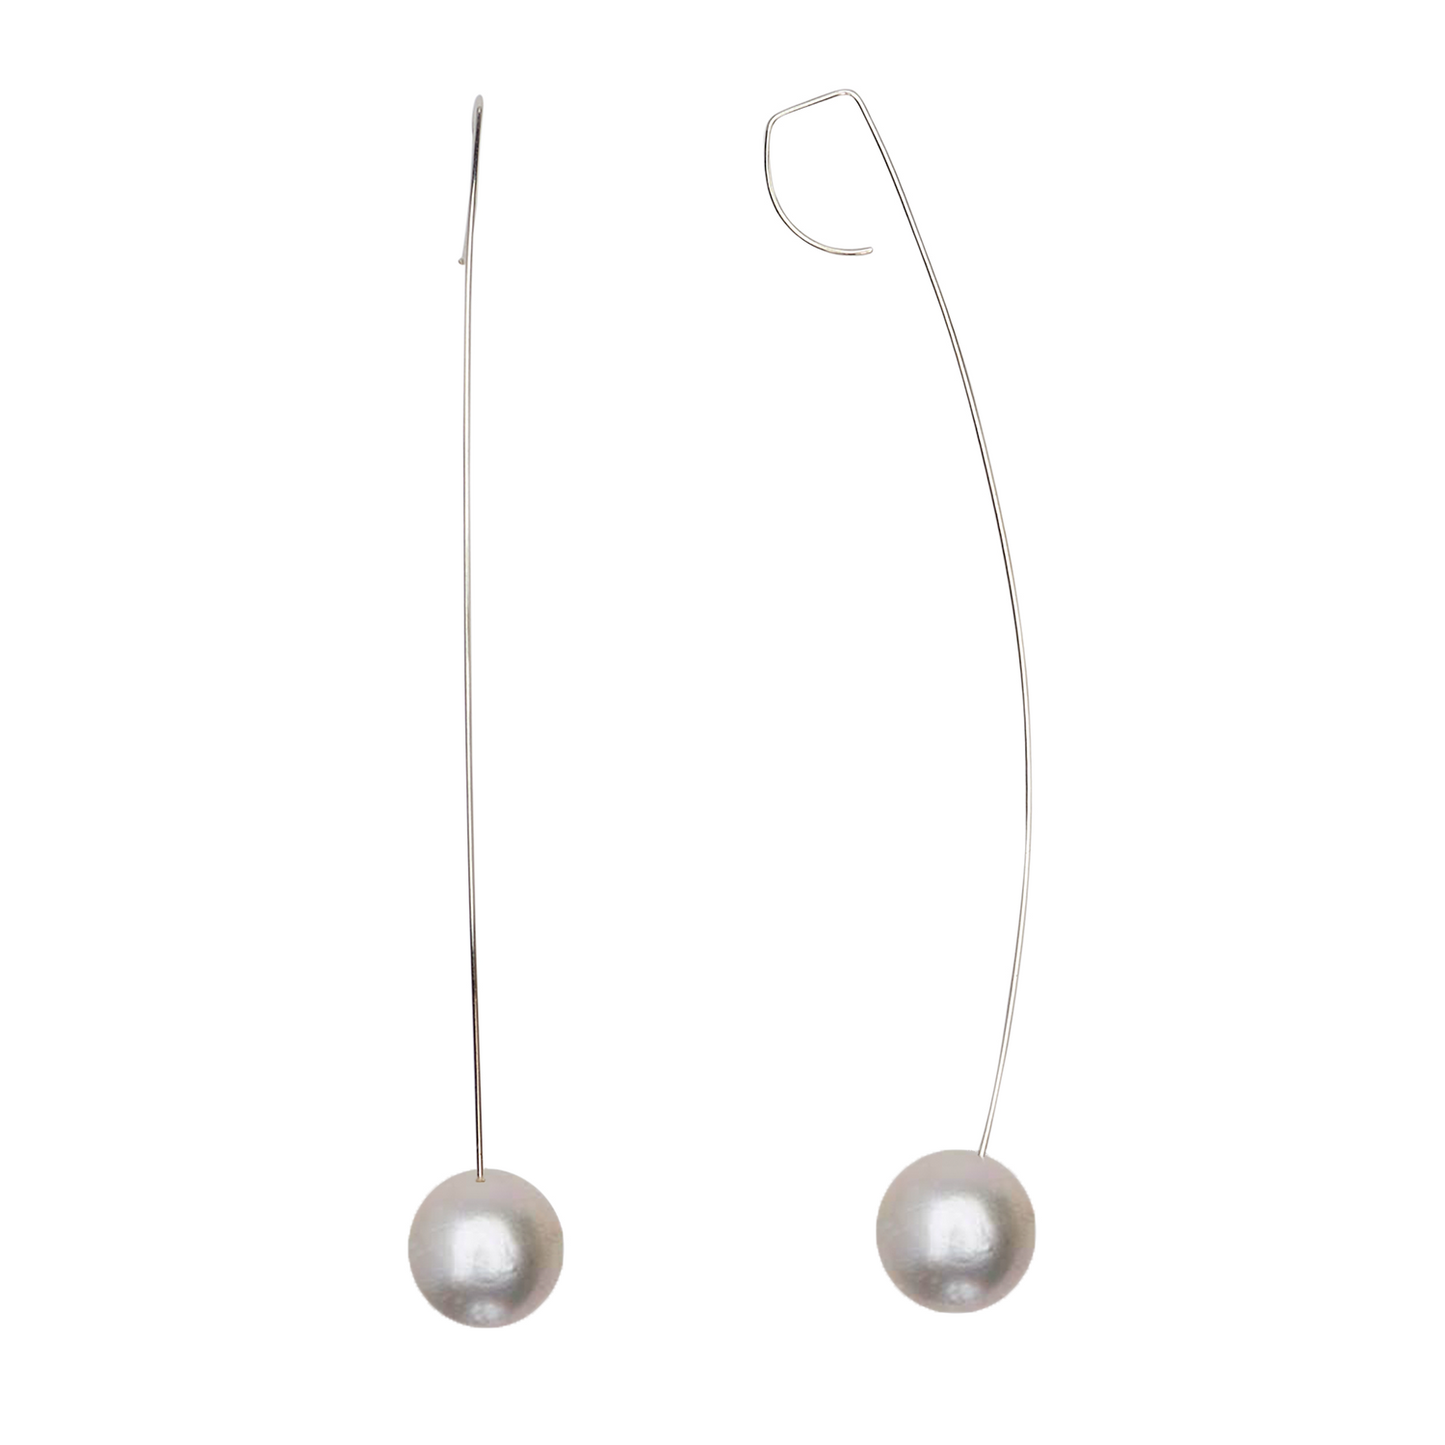 Long Curved Drop Earrings with Round Freshwater Pearls